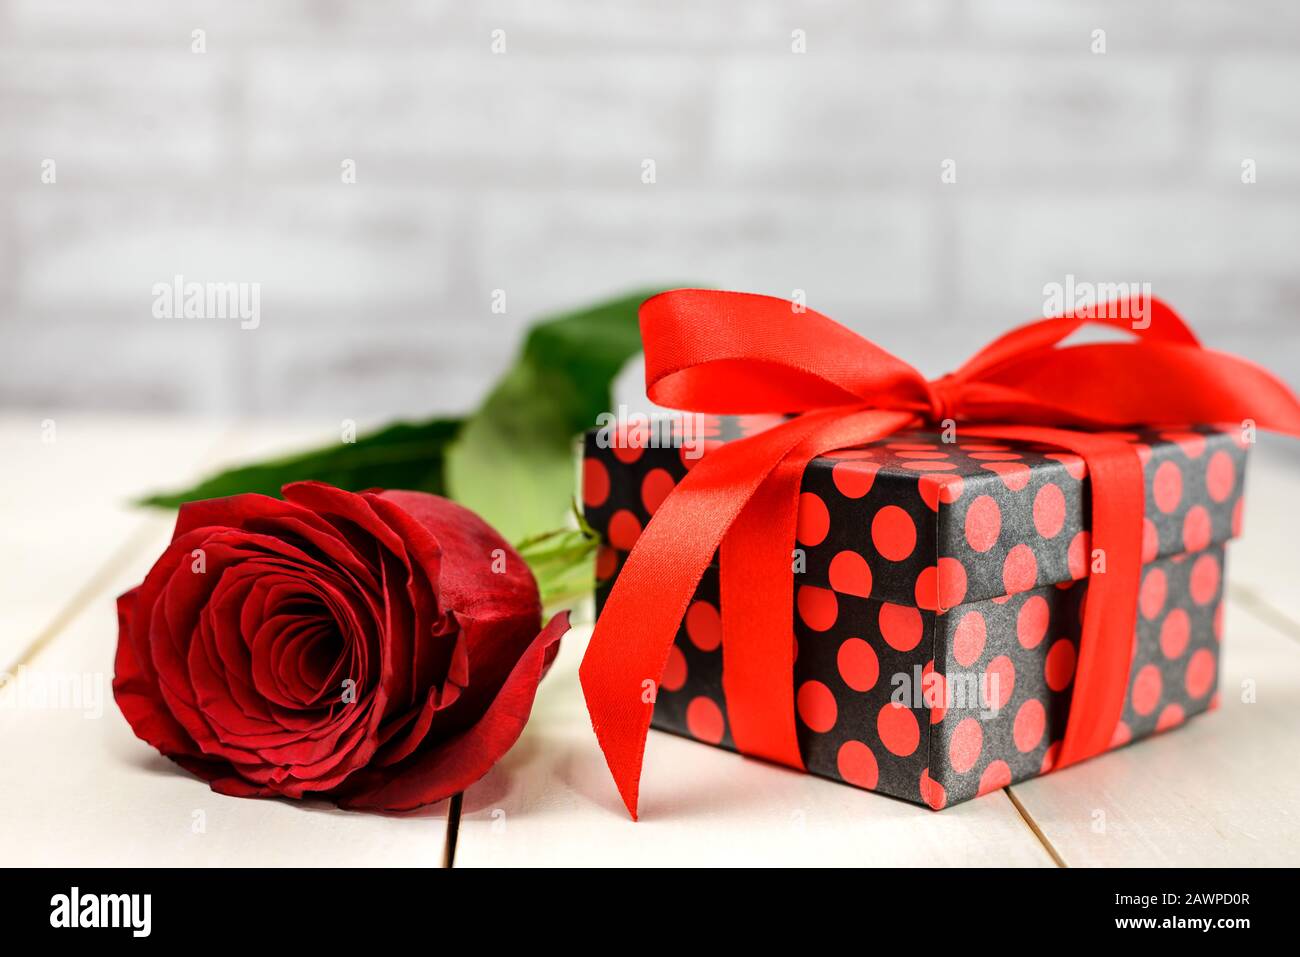 Red rose and gift box on white wooden table with copy space for text. Valentine's Day and Women's Day card concept. Stock Photo